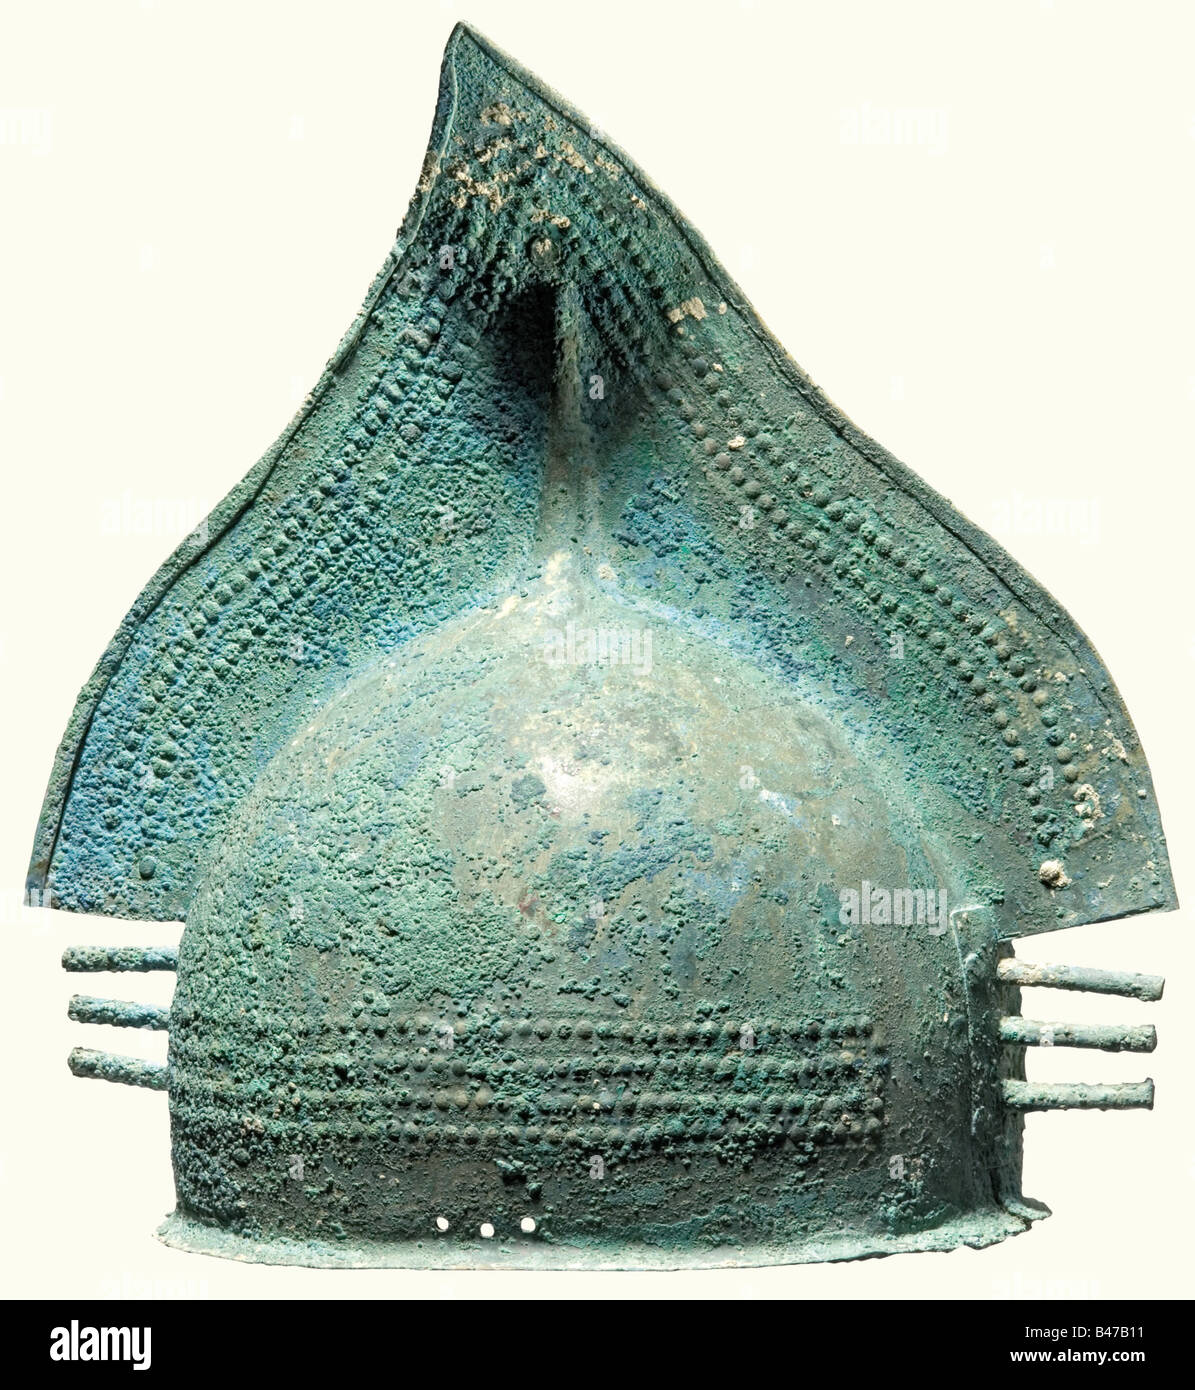 A bronze comb helmet, Early Iron Age, 9th/8th century B.C. A bronze helmet made of two plates with a narrow, protuding lower rim. The point of the large, triangular comb is slightly bent. Both halves of the helmet are fastened together by turned under edges or riveting. The front and back sides of the helmet overlap and are riveted with heavy bronze plates, each decorated with a circle and each with three protruding, bar-shaped spikes. Helmet body and comb are decorated with large and small knobs. On each side are three holes for attaching the chinstrap. Greeni, Stock Photo